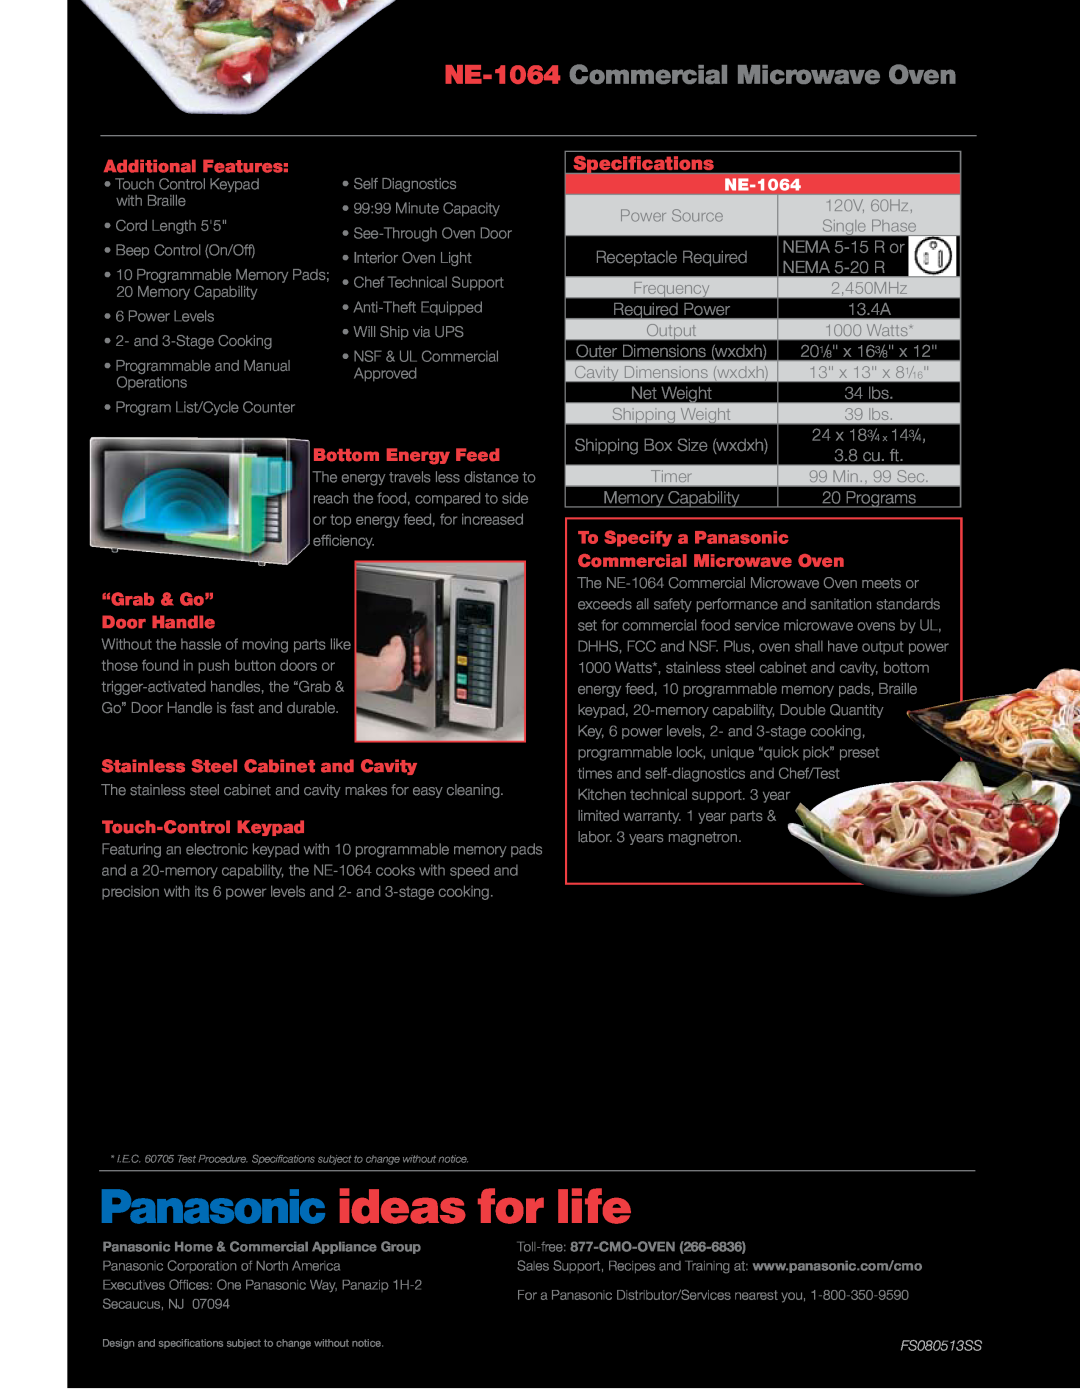 Panasonic NE-1064 Commercial Microwave Oven, Specifications, Additional Features, Bottom Energy Feed, Power Source 